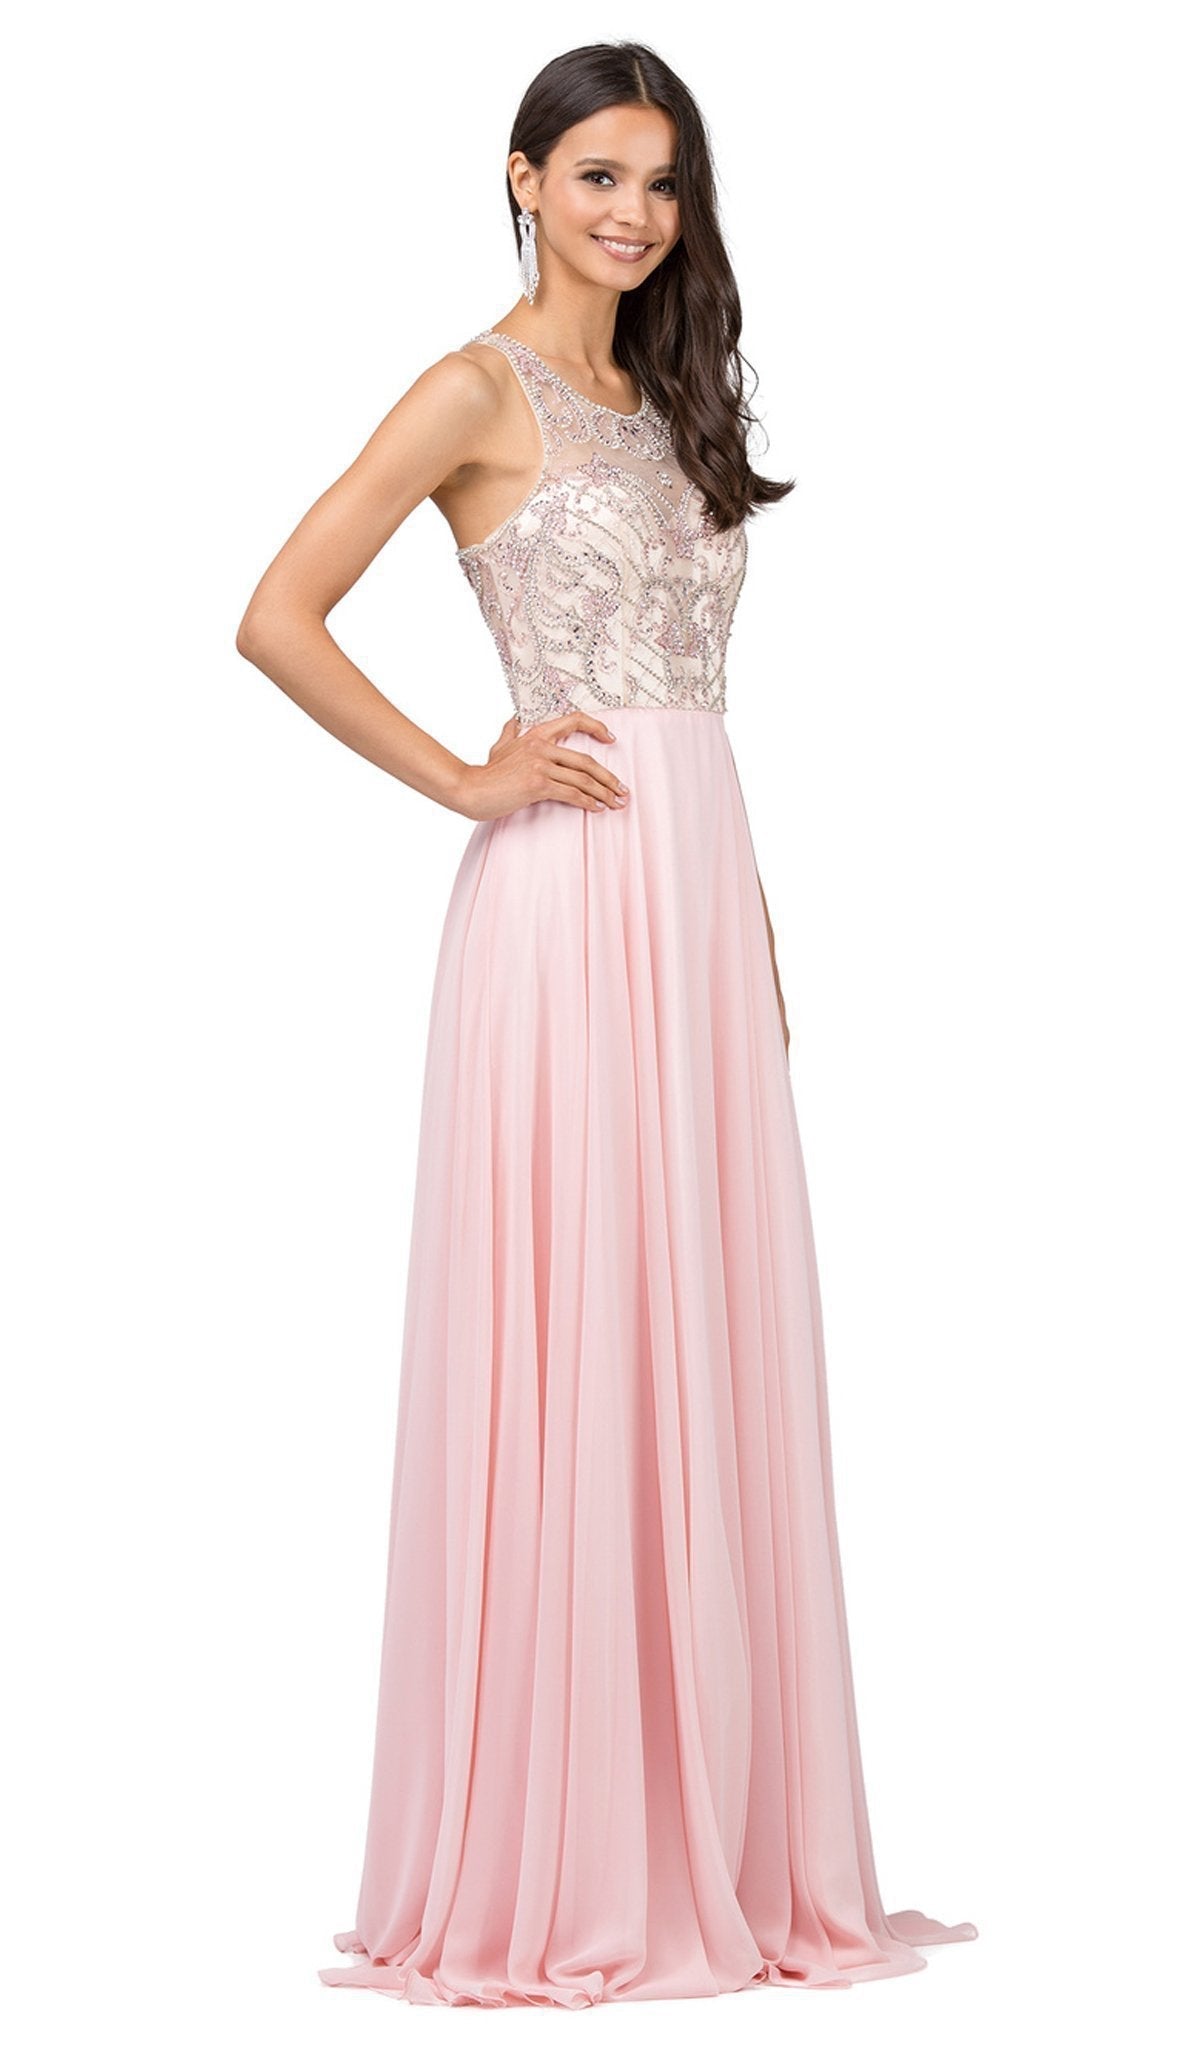 Dancing Queen - 9901 Beaded Illusion Scoop A-line Evening Dress Special Occasion Dress XS / Blush